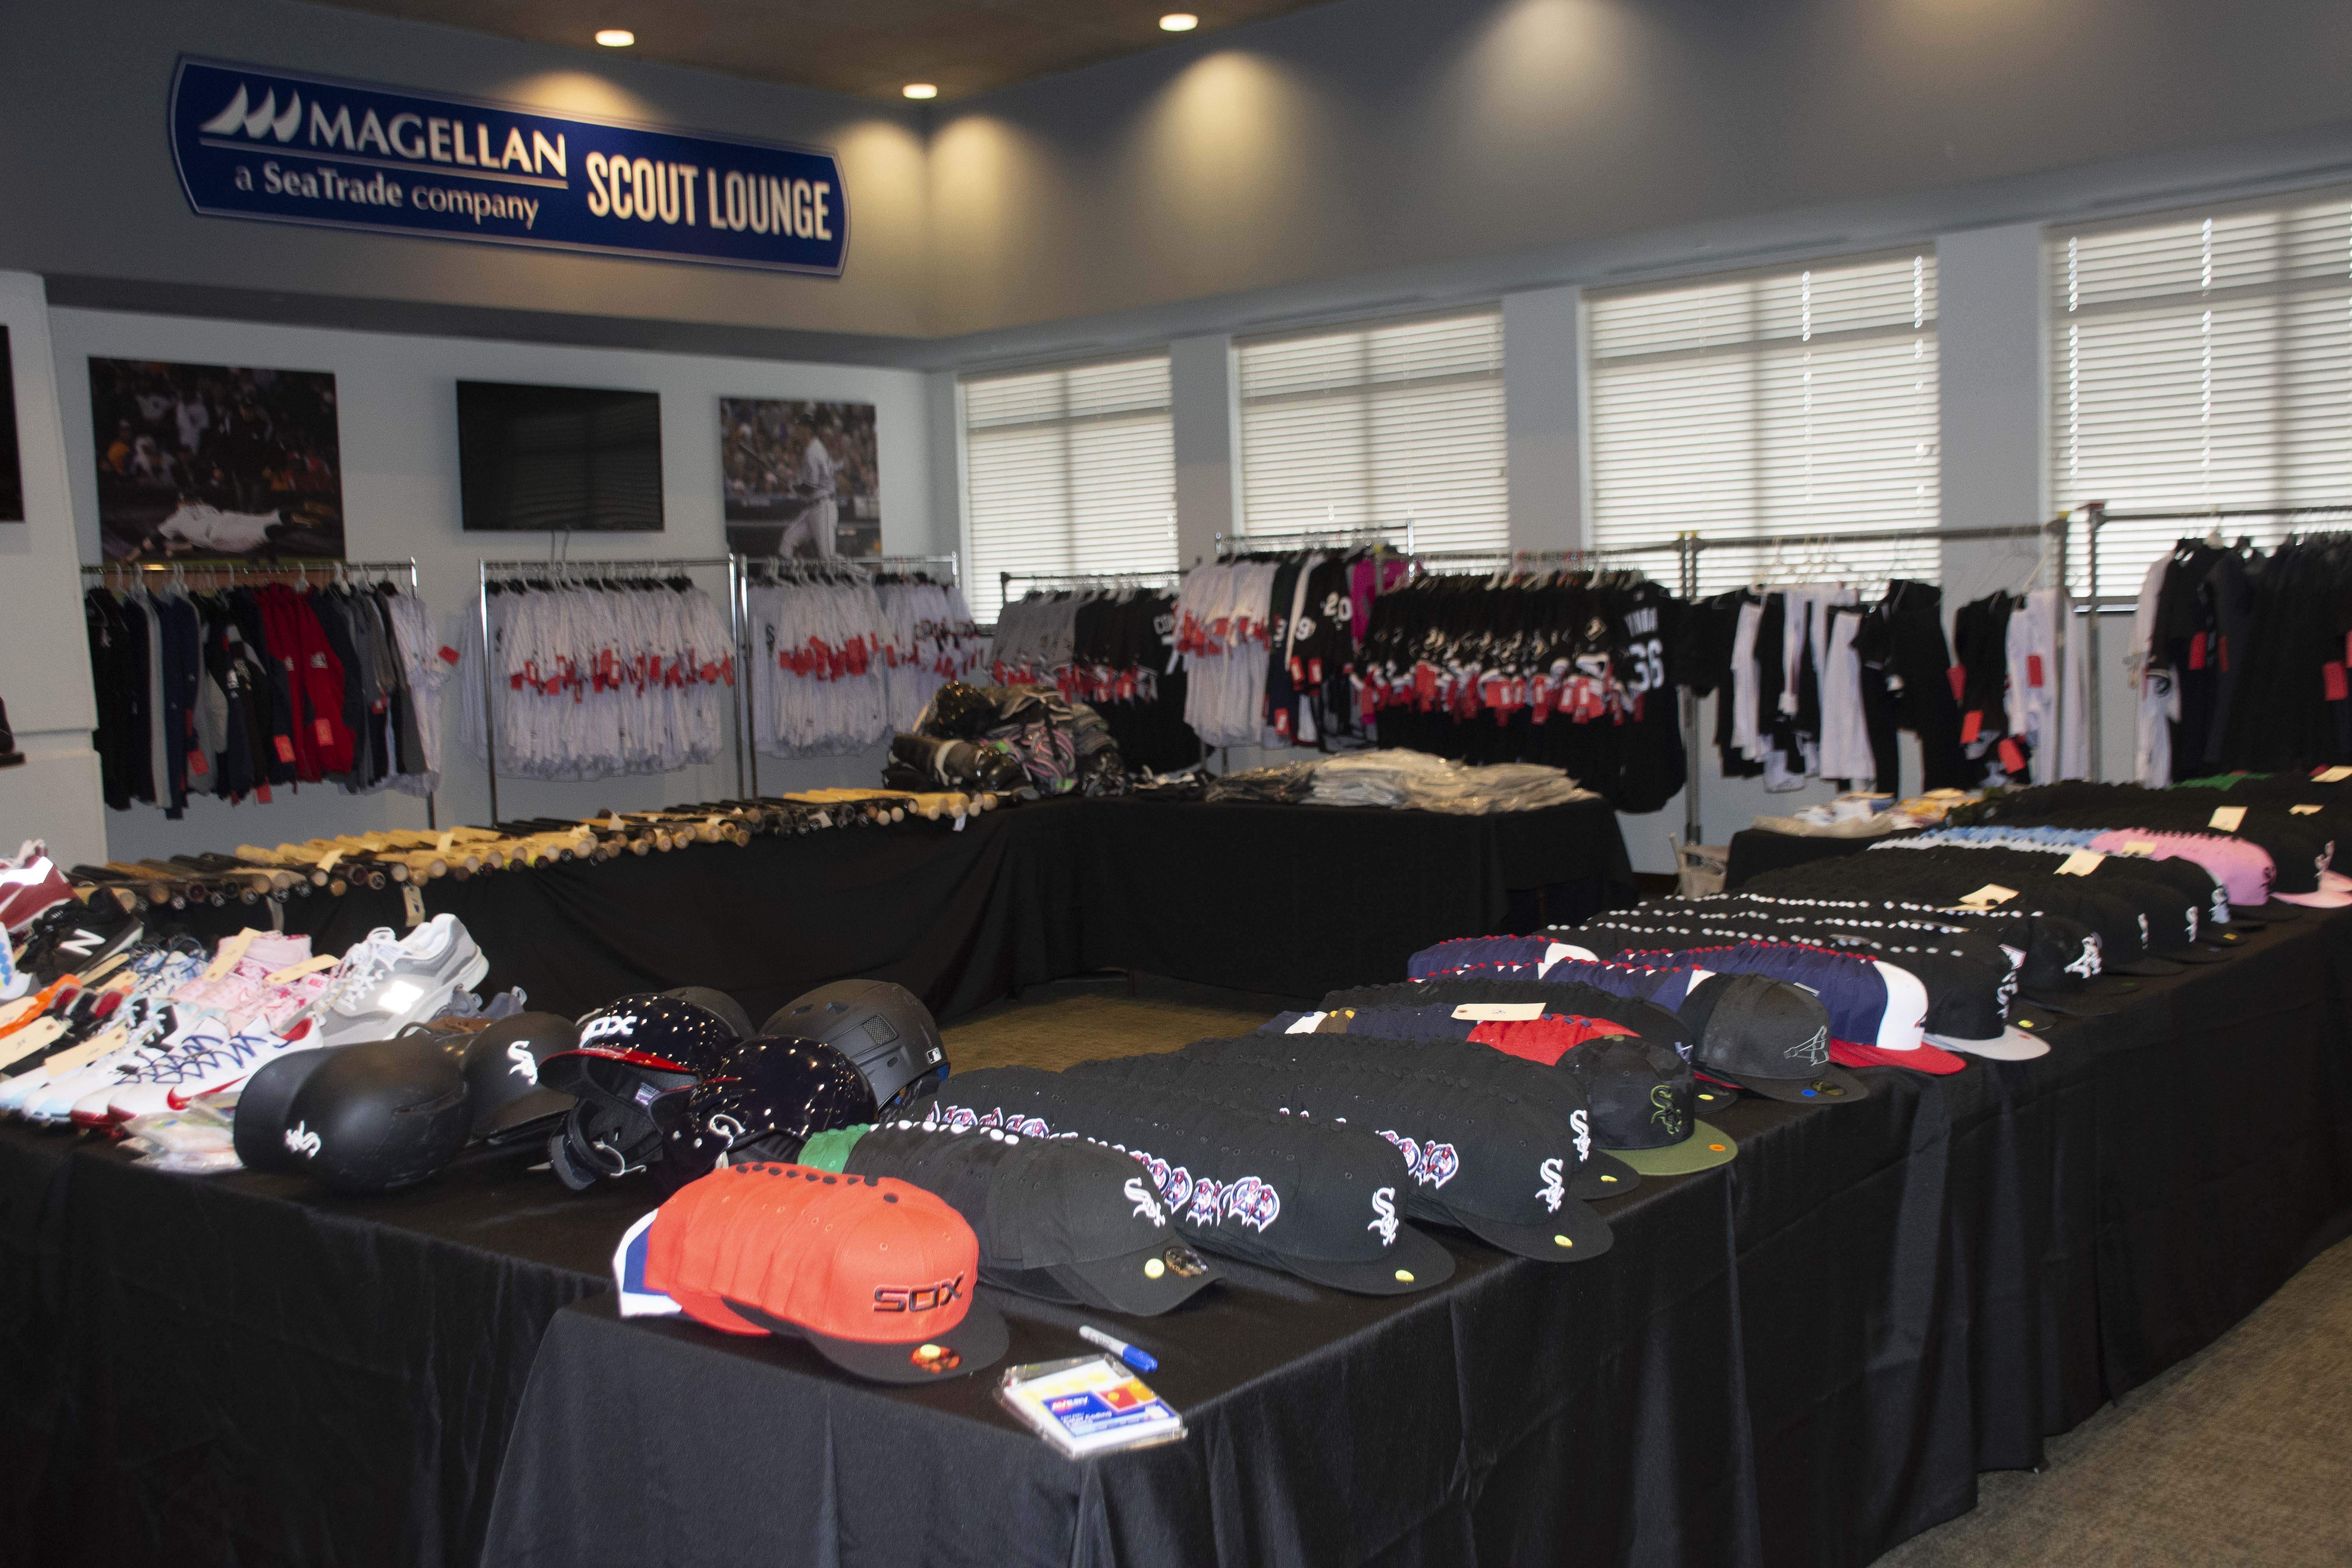 A White Sox Garage Sale? White Sox Charities Gets It RIGHT. - From The 108